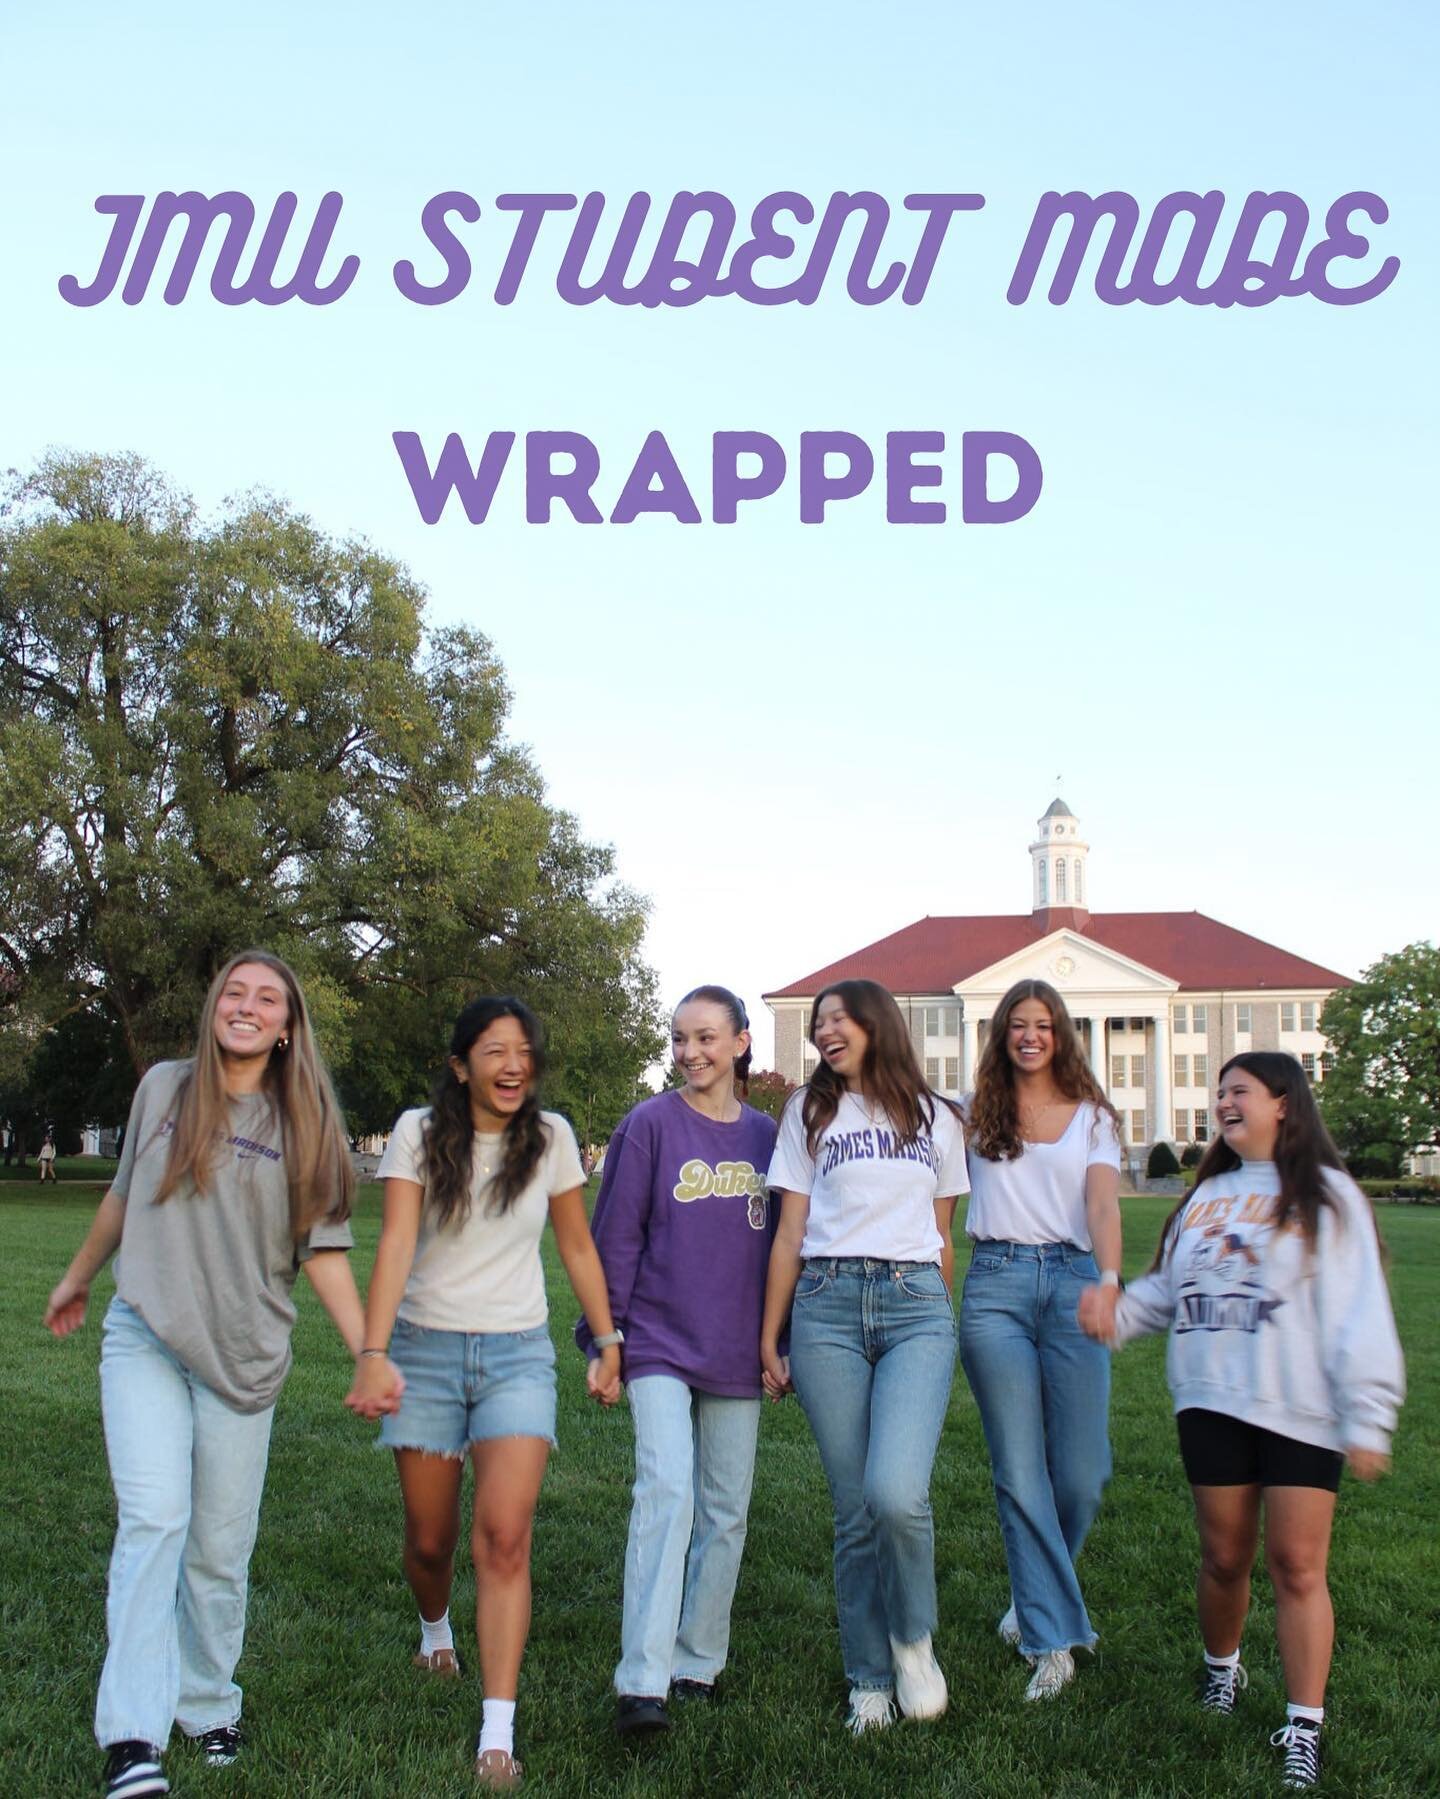 JMU Student Made Wrapped! 🫶🏻
✨
This semester has been our best one yet and we can&rsquo;t wait to see what the next one has in store!
✨
#studentmade #jmu #studentmadejmu #smallbusiness